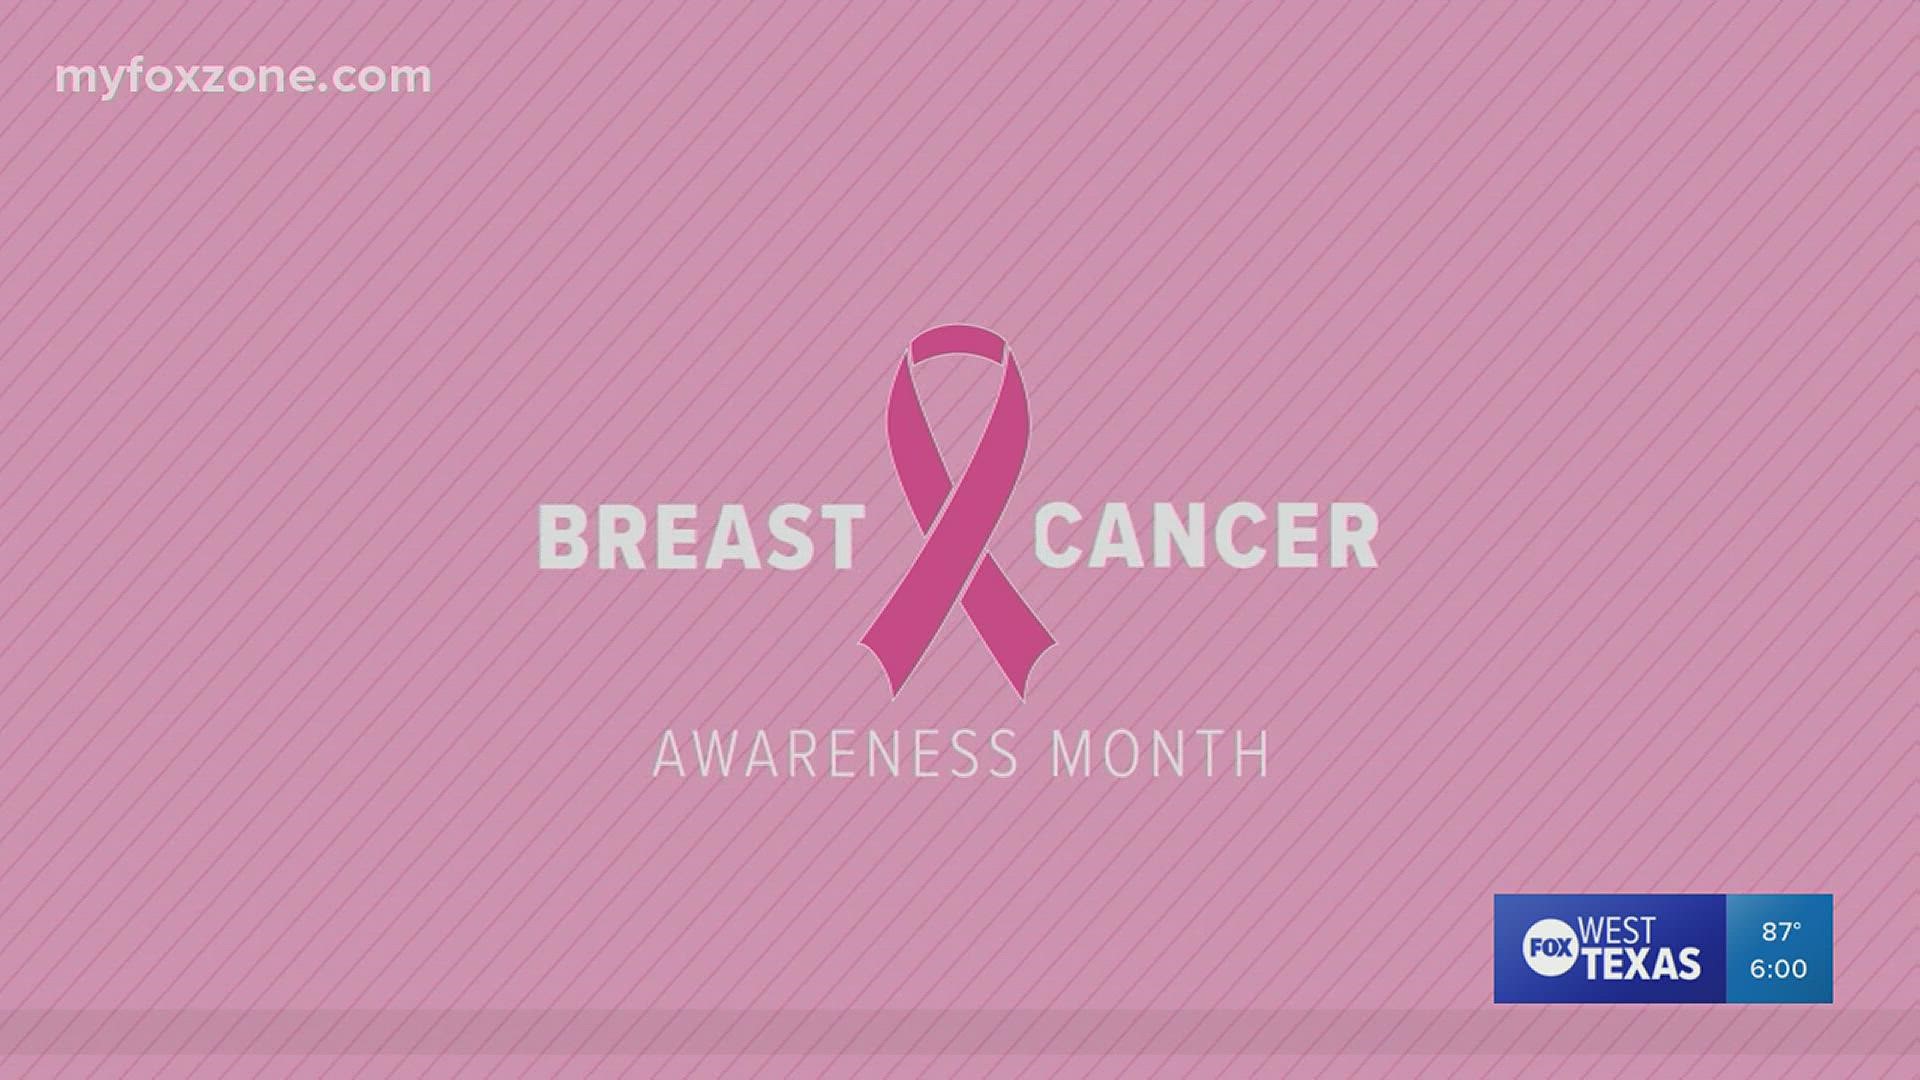 Dr. Michelle Snuggs details symptoms, diagnosis and treatments for breast cancer.